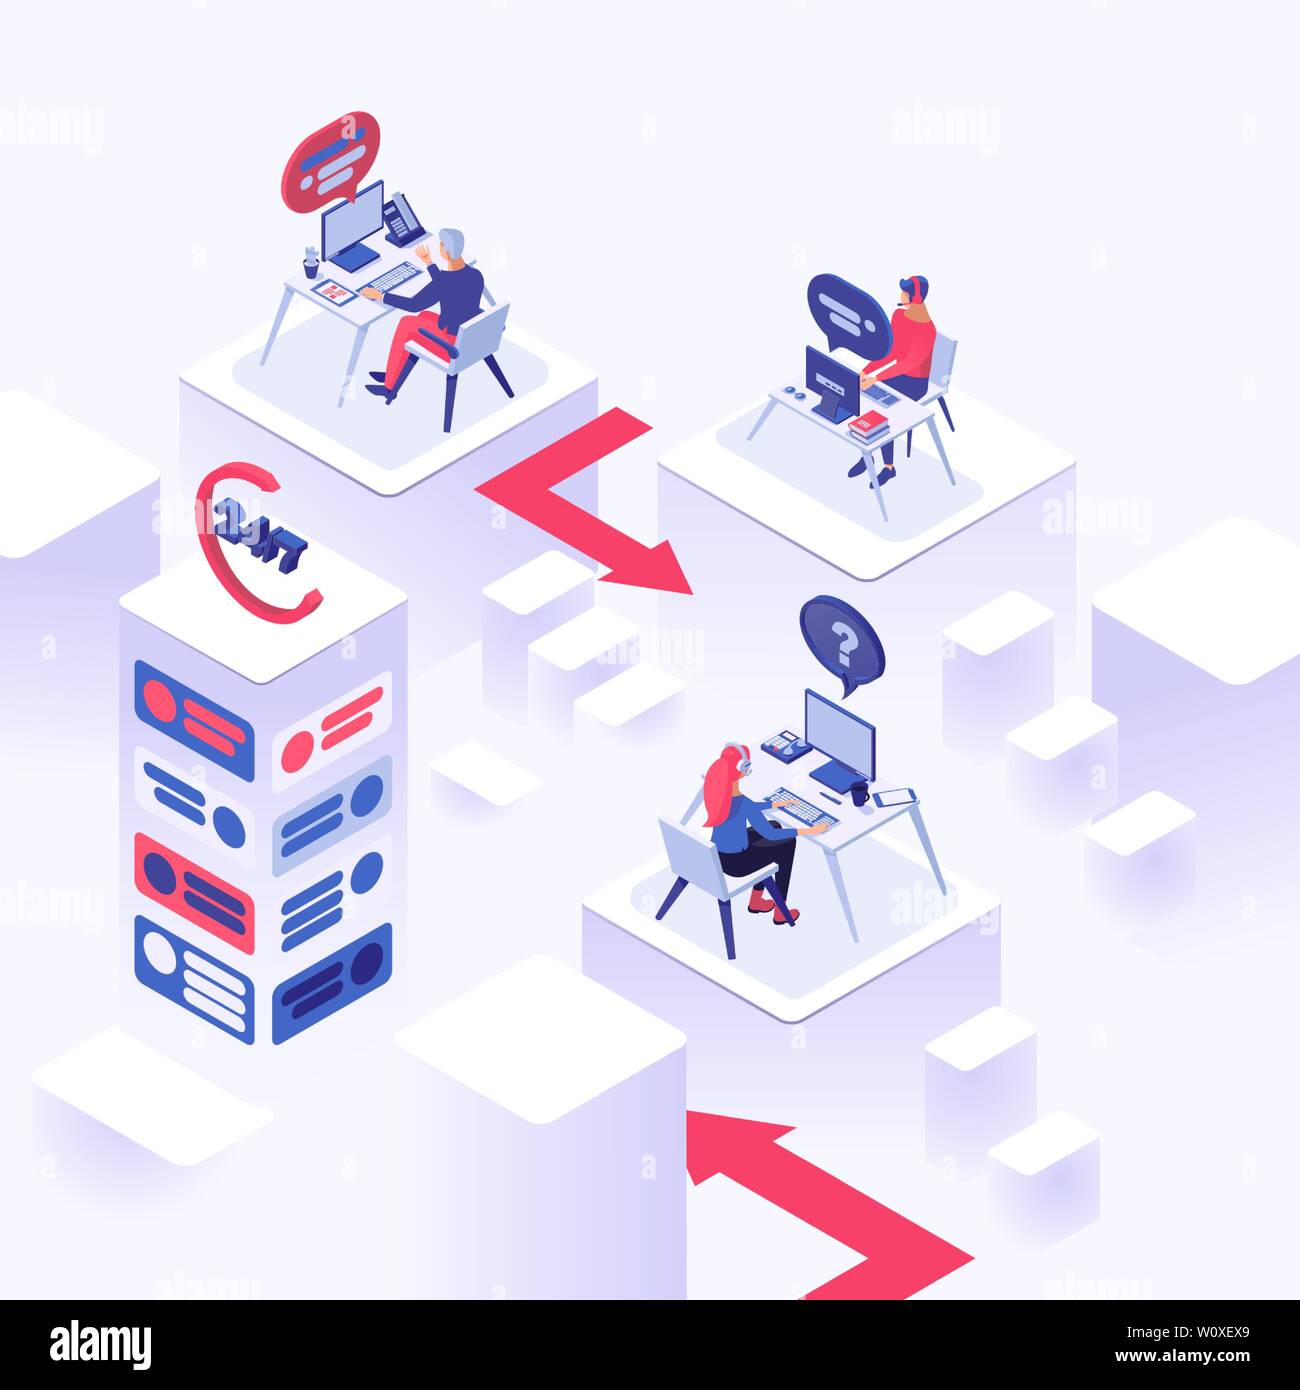 Online support vector isometric illustration. Helpline operators with headset, consultant managers 3d cartoon characters. Online global tech support, office workers with headphones at workplace Stock Vector